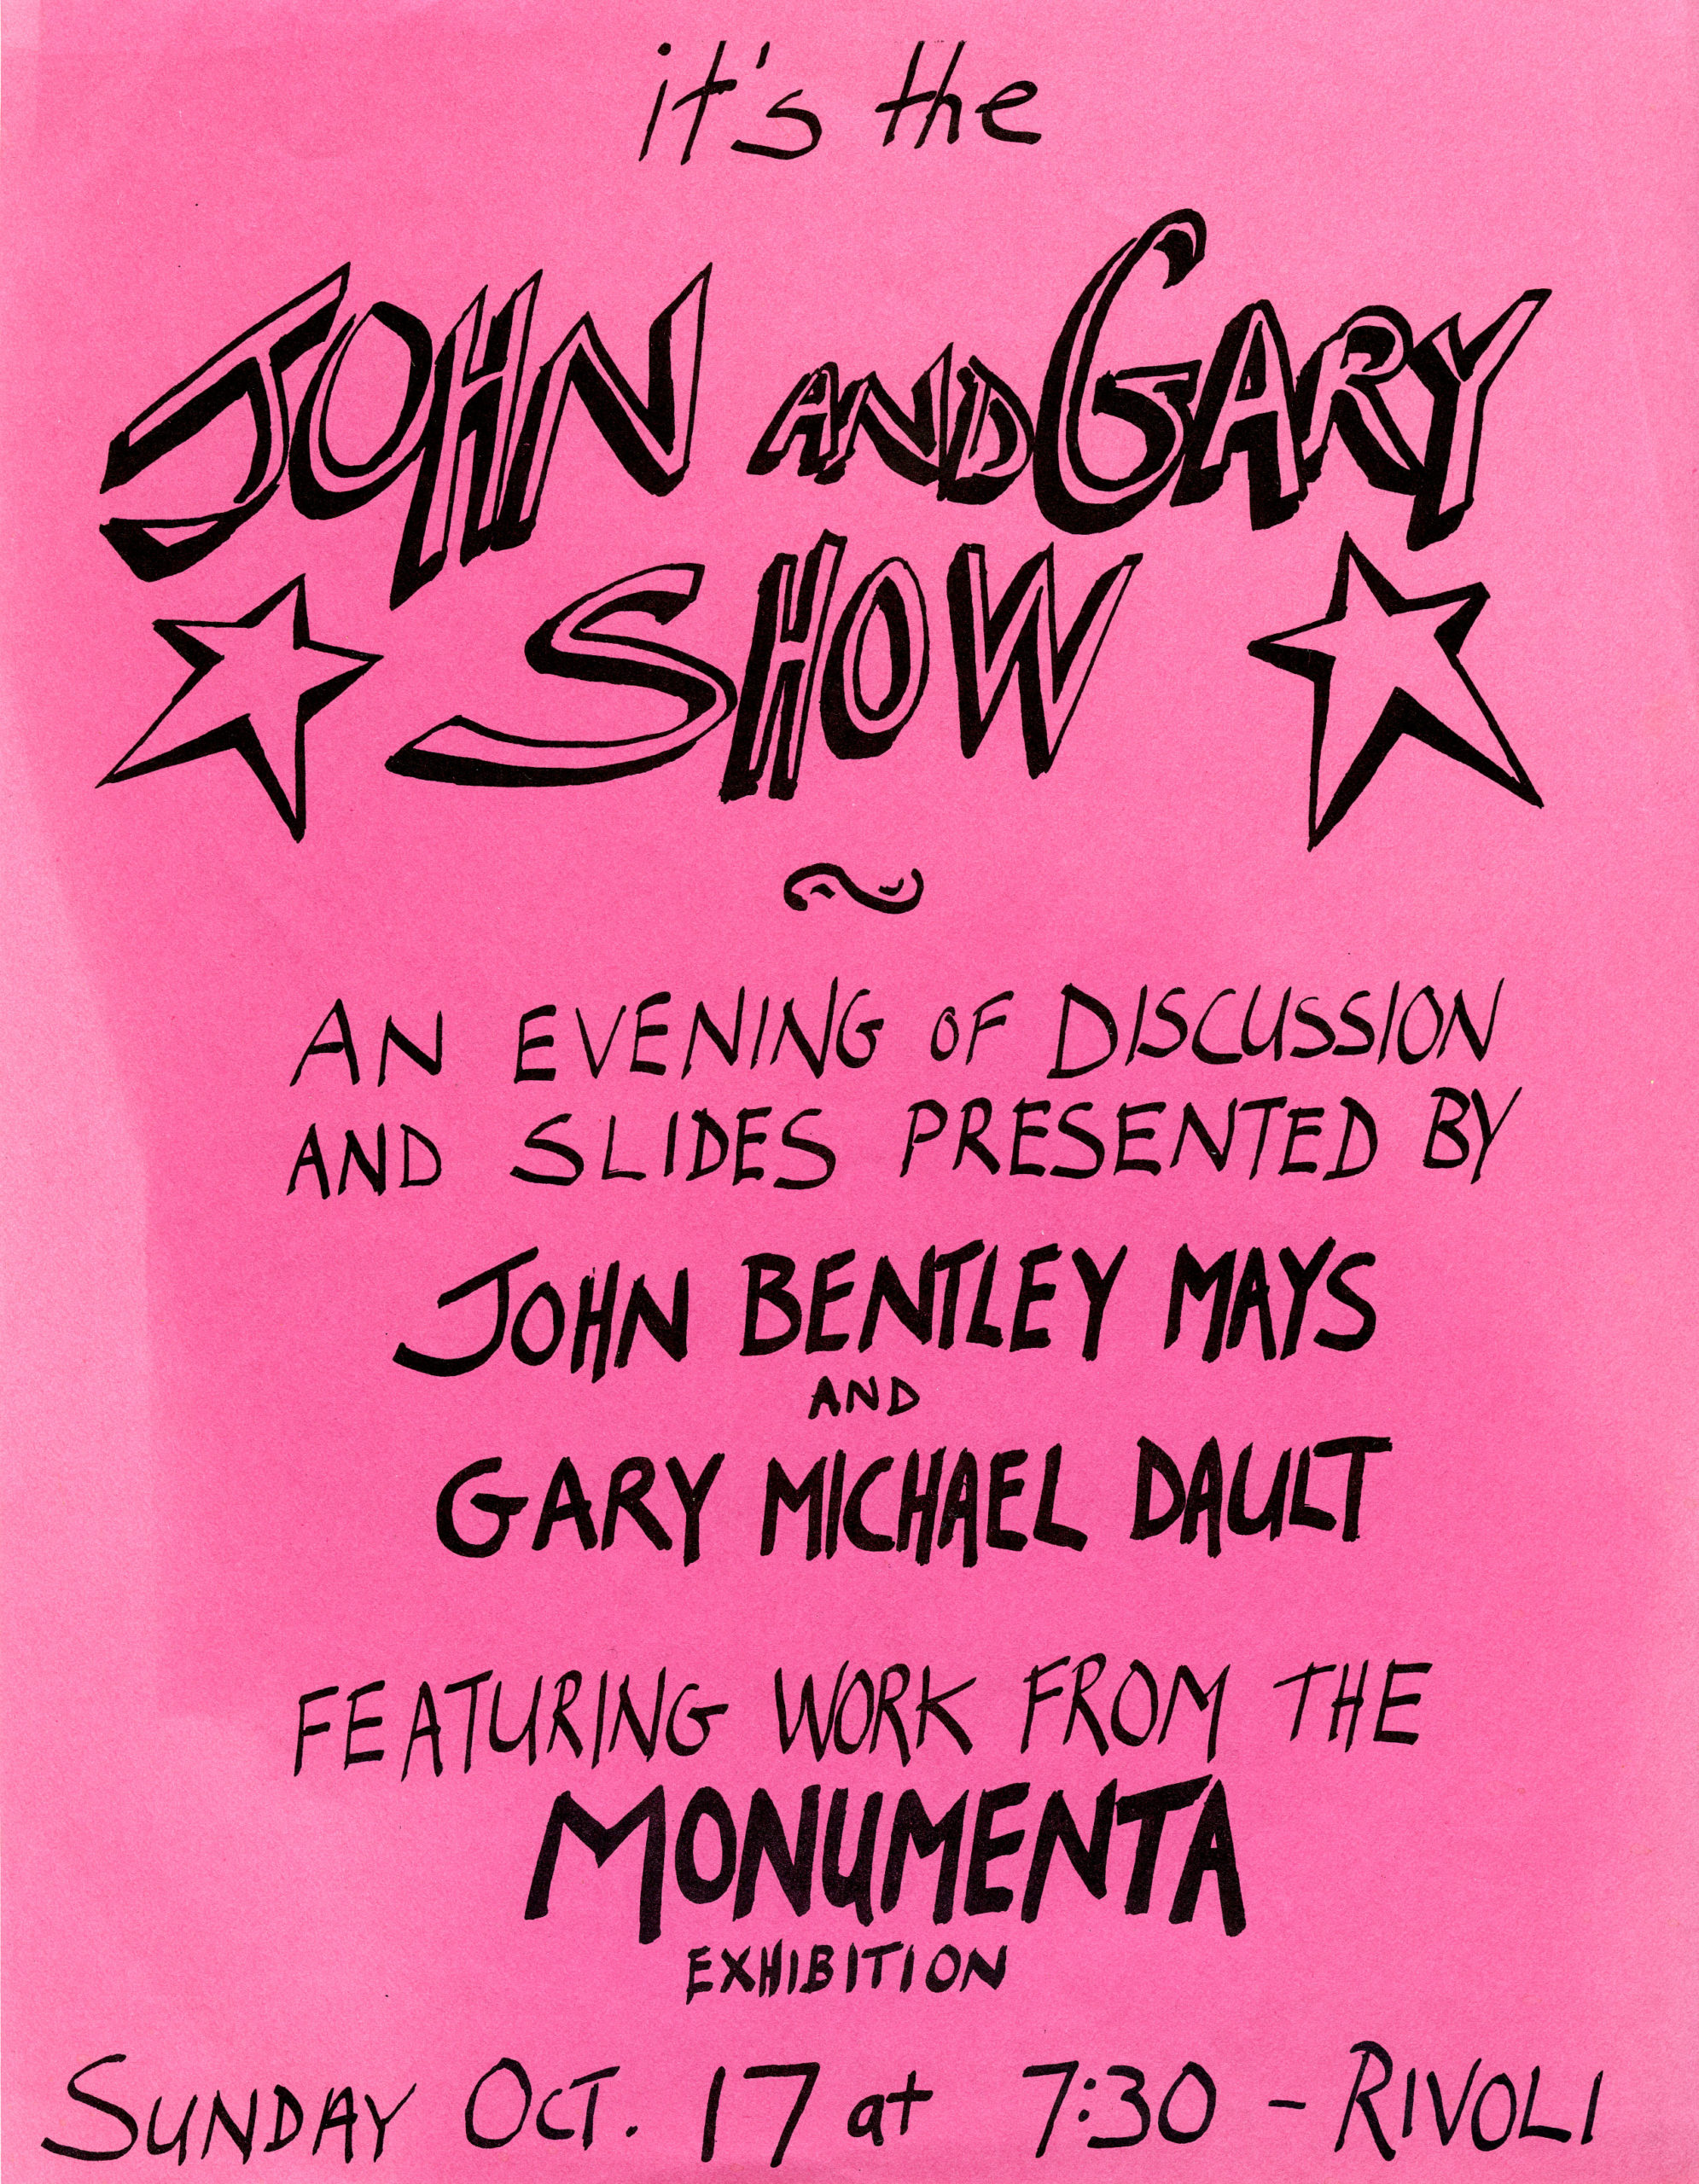 Scan of a show flyer hand drawn with a black pen on pink paper